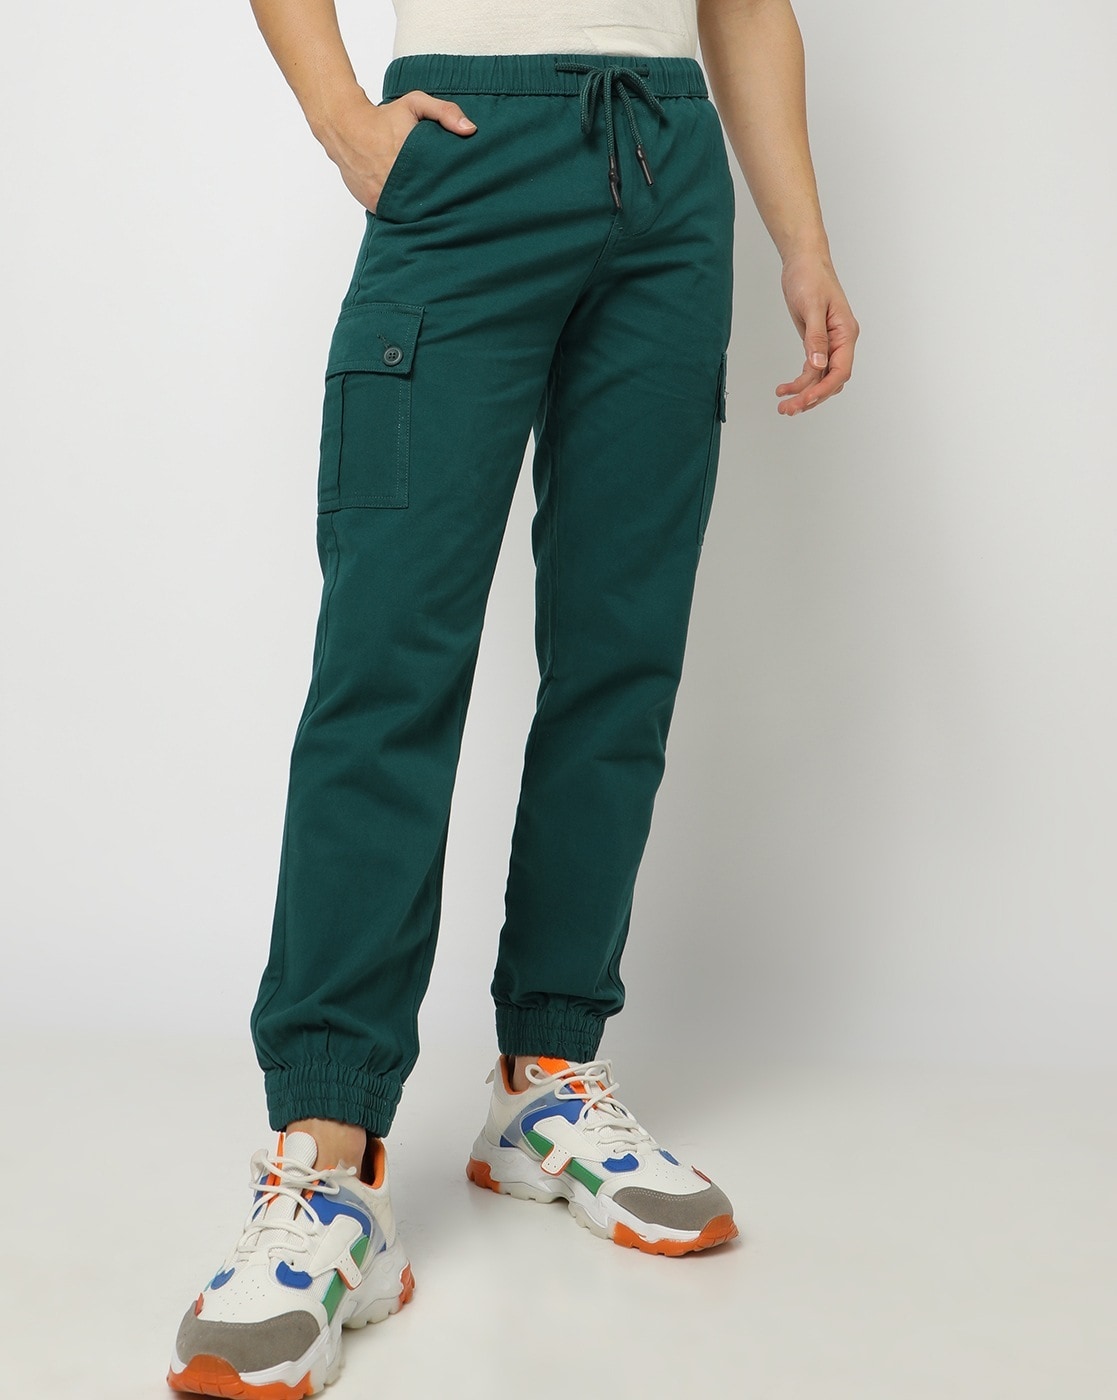 COULTERVILLE MEN'S RELAXED FIT CARGO TROUSERS | KHAKI - Bellfield Clothing